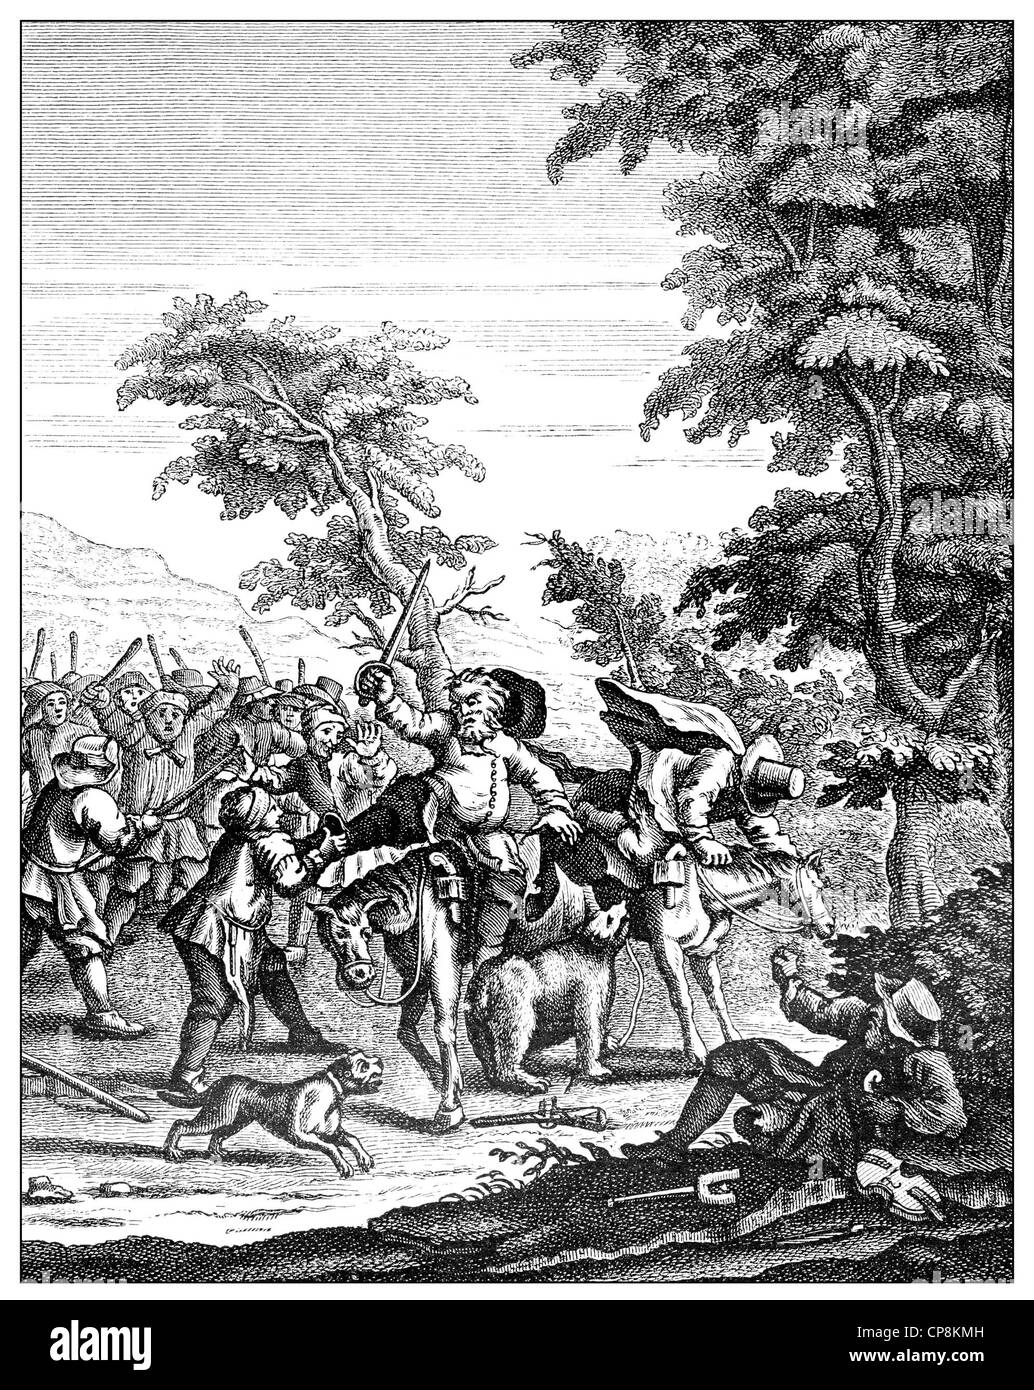 illustration from 1726 by William Hogarth, 1697 - 1764, a socially critical English painter and graphic artist, to Hudibras by S Stock Photo